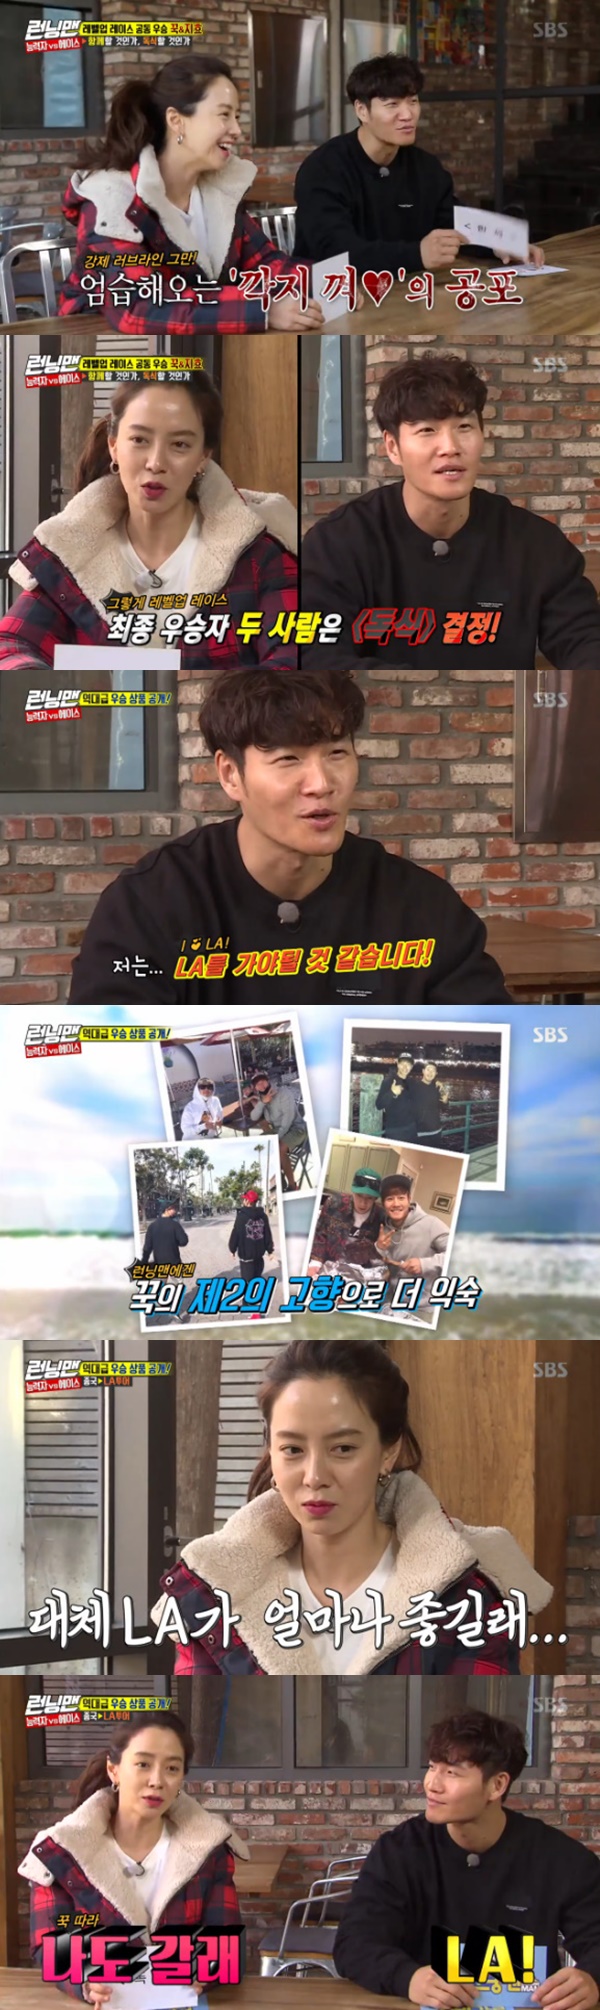 Running Man Kim Jong-kook was conscious of Song Ji-hyo and Love Line.In the SBS entertainment program Running Man broadcasted on the 10th, Legend Big Match of Kim Jong-kook VS Ace Song Ji-hyo was drawn.Kim Jong-kook Song Ji-hyo, the winner of the last race, decided to win the prize money.Kim Jong-kook was conscious of the love line, saying, If you choose to join together, you can not afford to make fun of the members.So we decided to play the race to cover the final winner again.Kim Jong-kook asked to send her a trip to LA if she won, and Song Ji-hyo also made Choices a trip to LA as a winning gift.After the two mens confrontation, the winner decided to go on a trip to LA by pointing to another member. Haha suspected Loveline, saying, I do not think they are picking each other.Lee Kwang-soo also laughed at the joke Pick the pod.